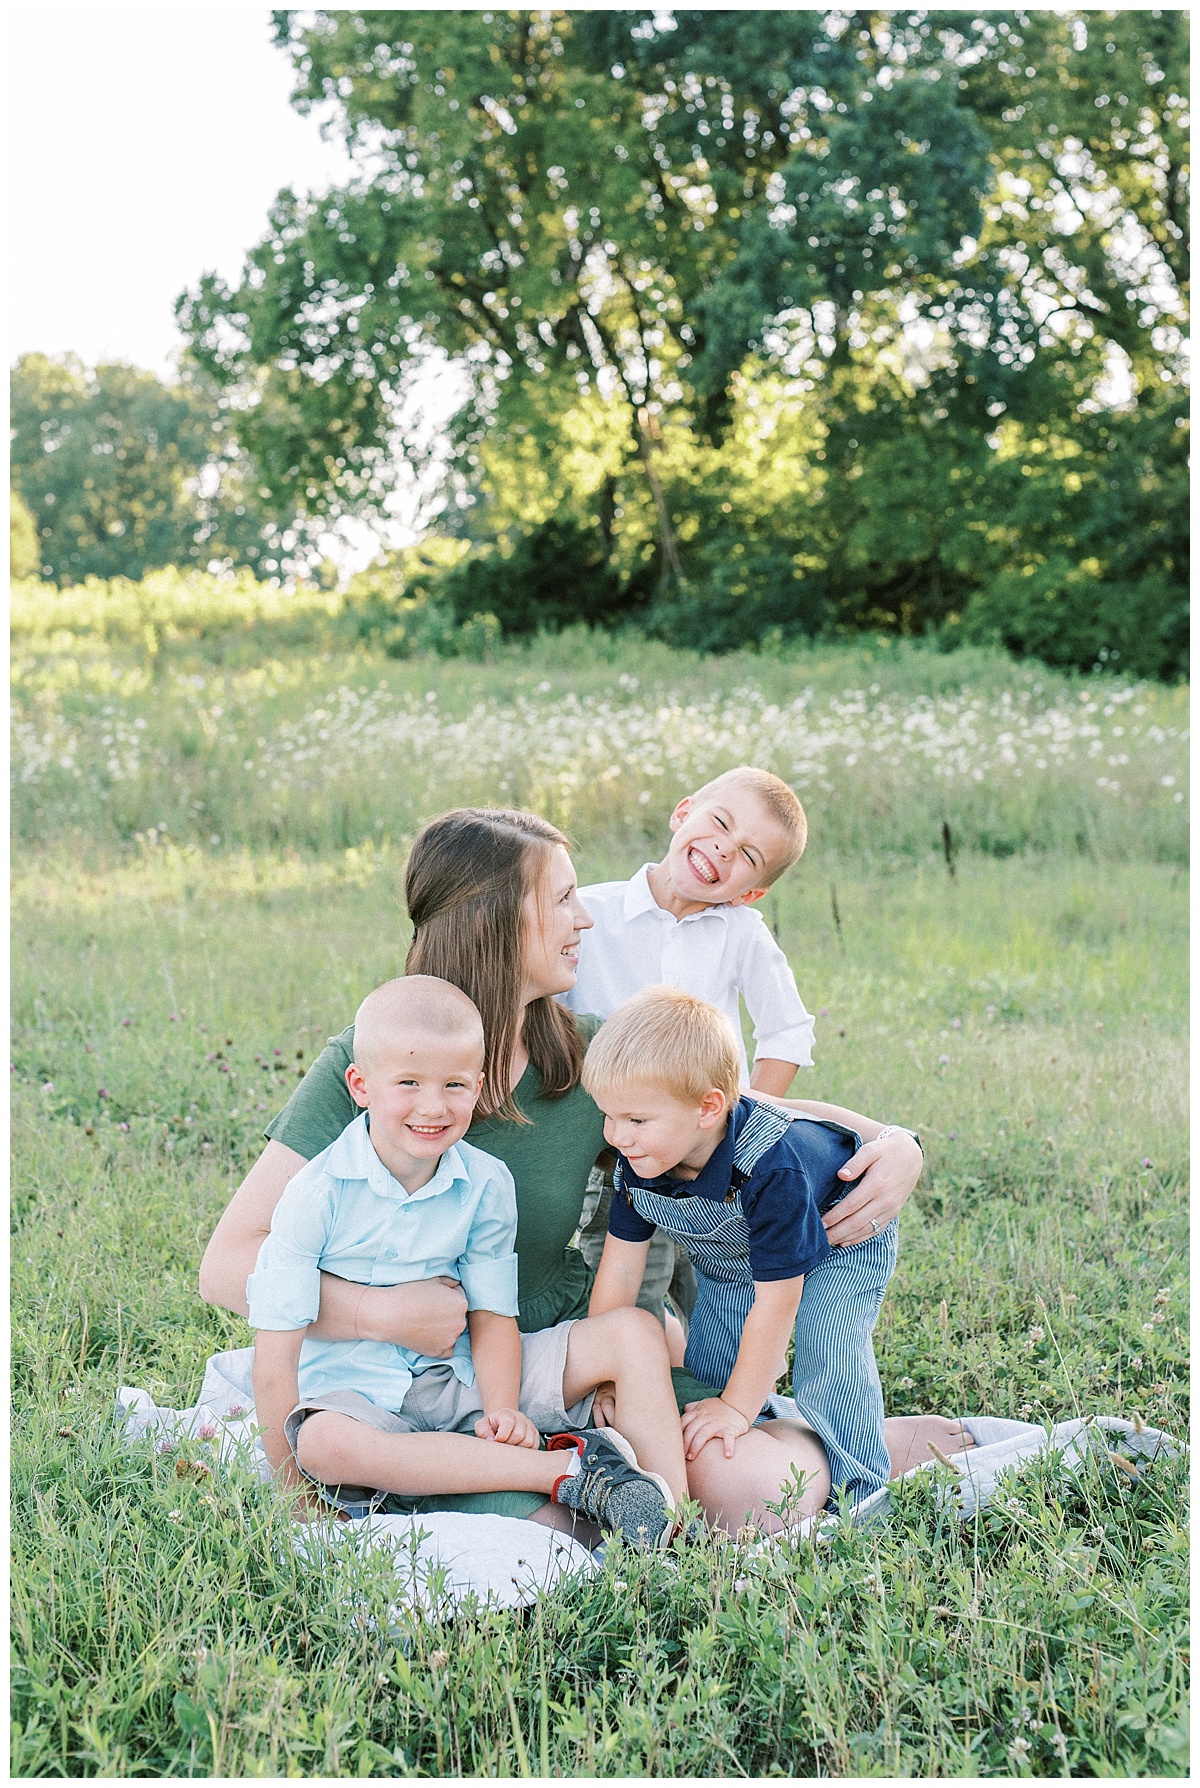 Outdoor Family Photography by Tennessee film photographer Grace Paul.